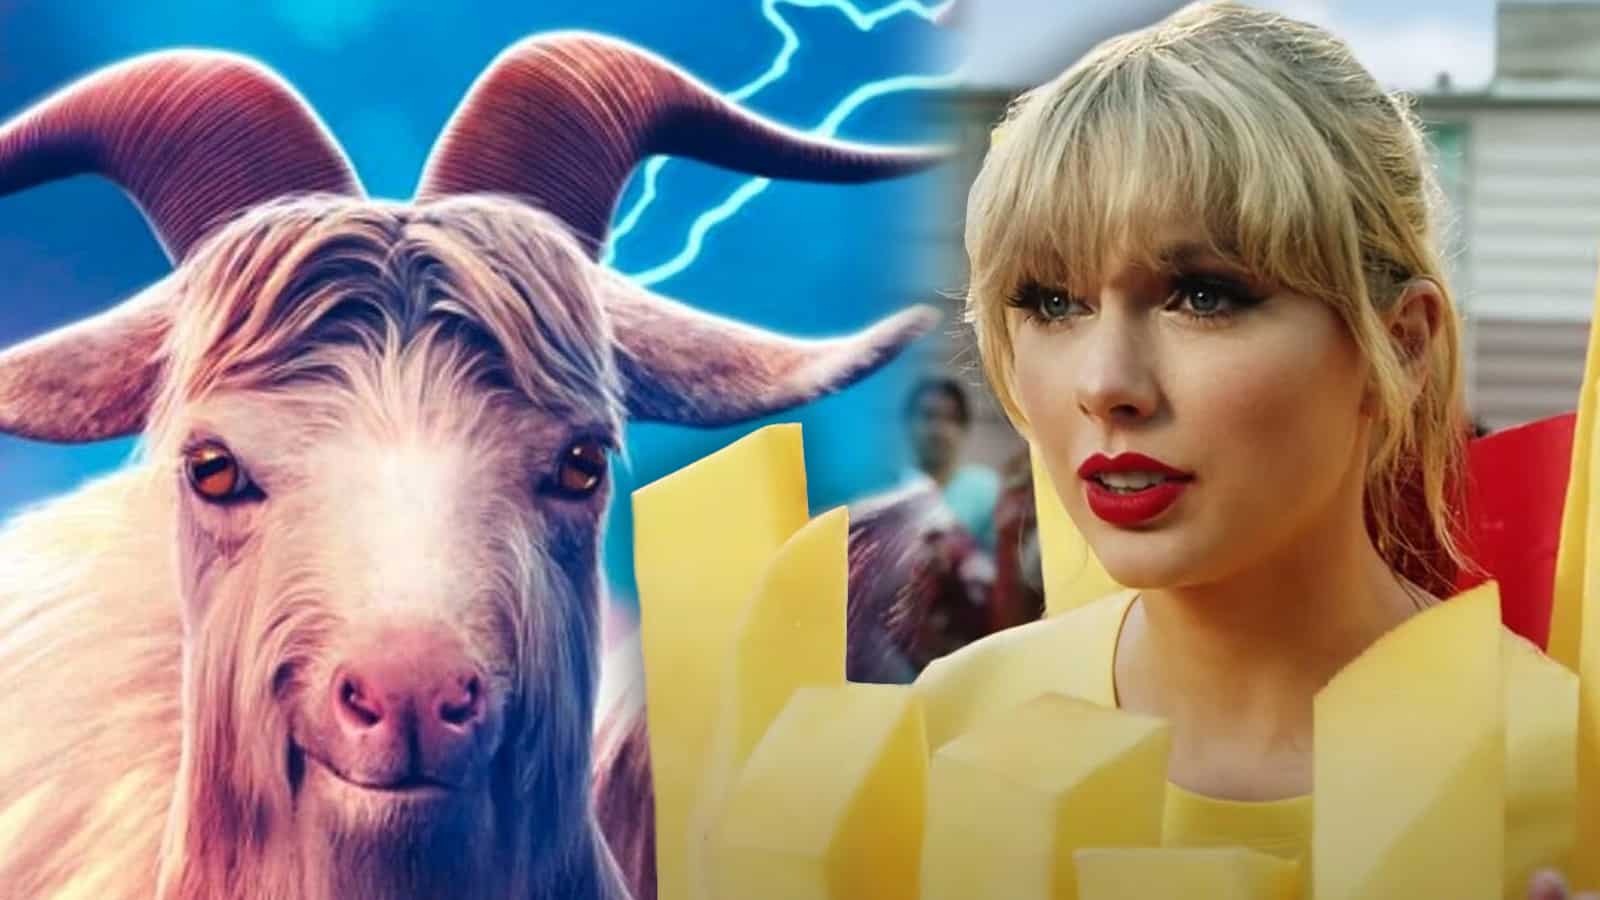 taylor swift looking at goat in thor movie